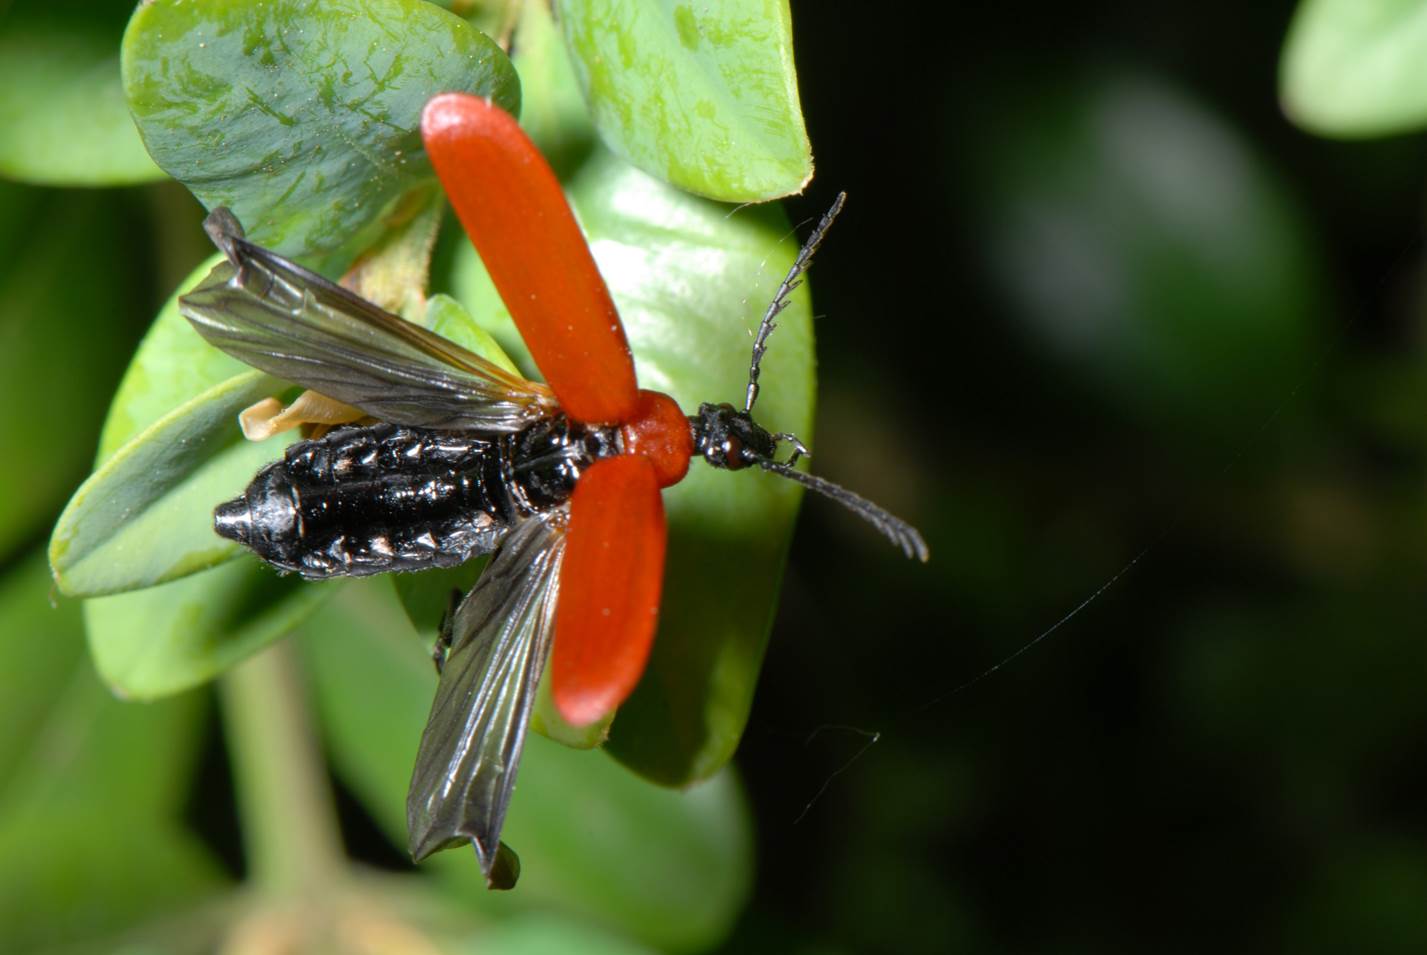 A close up of an insect on a branch

Description automatically generated